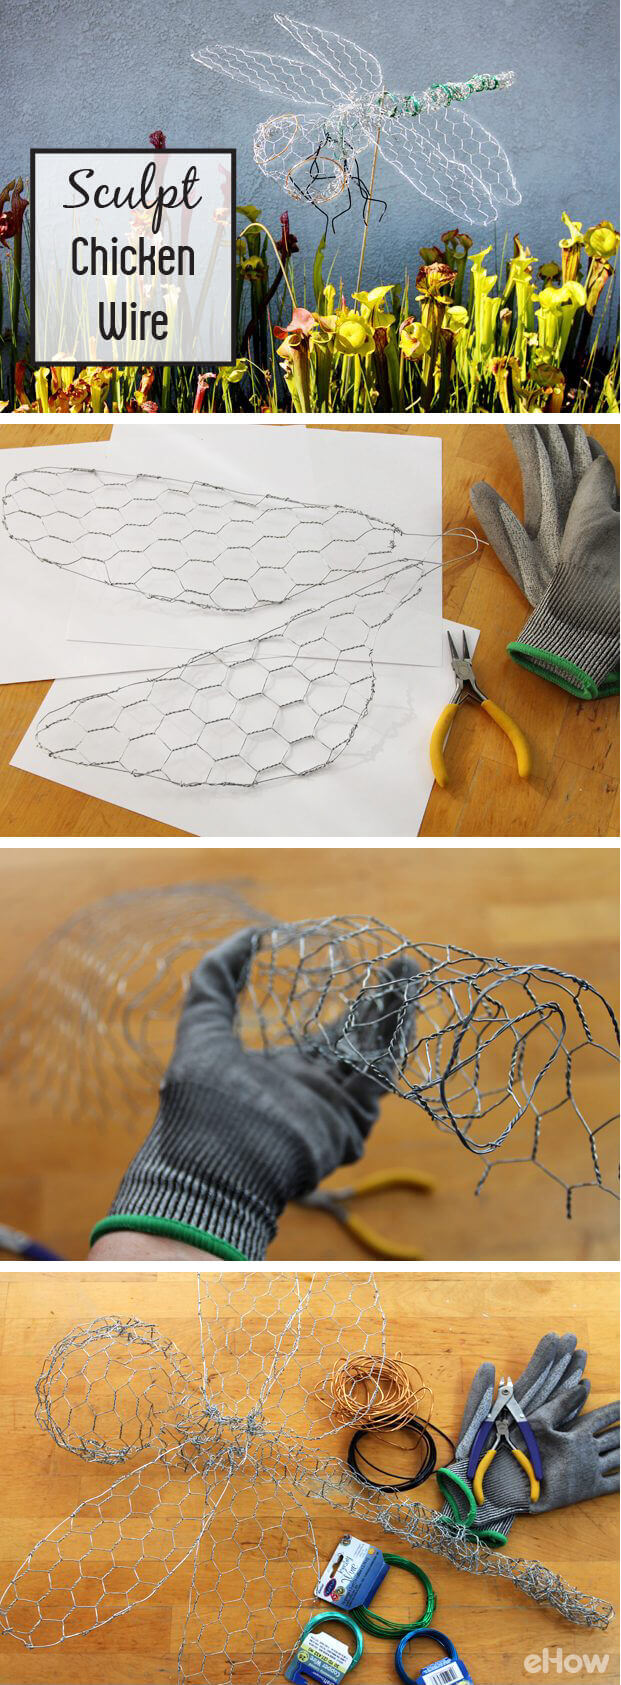 Make a Dragonfly from Chicken Wire